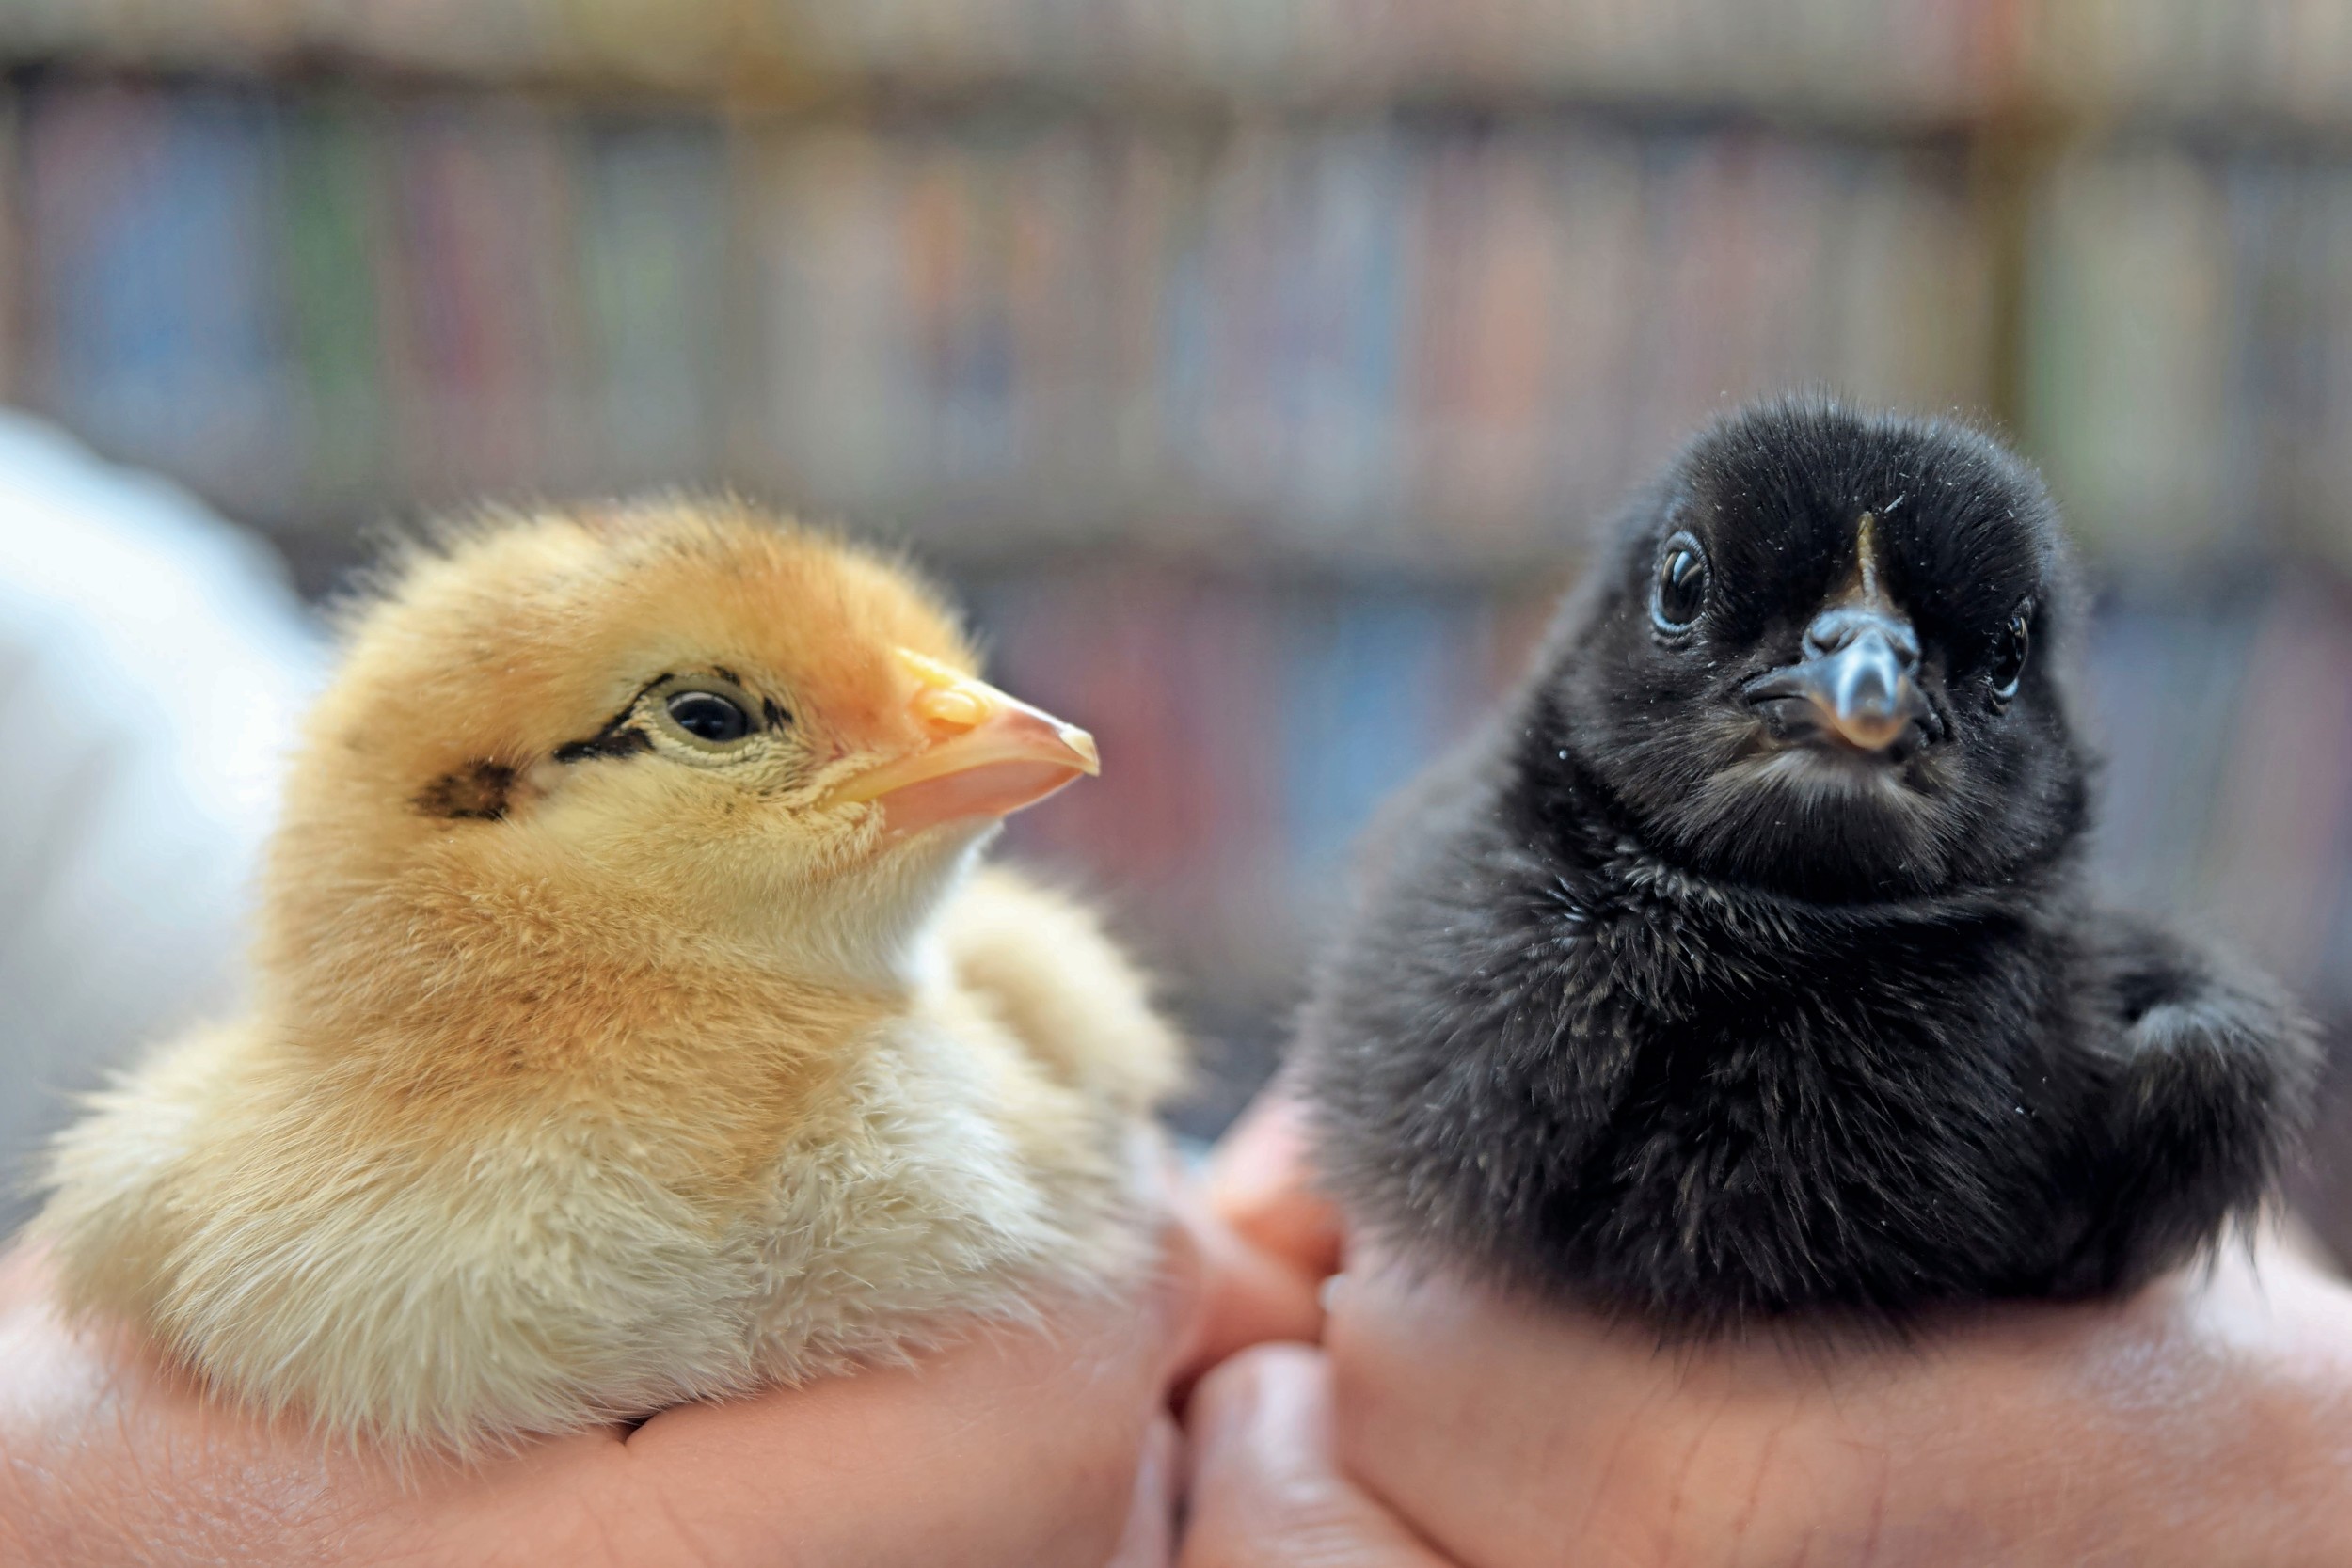 The Wantagh Public Library staff welcomed 10 chicks into the world on April 17 and 18. Librarians developed a program called From Egg to Chick to teach young patrons about how the birds develop.